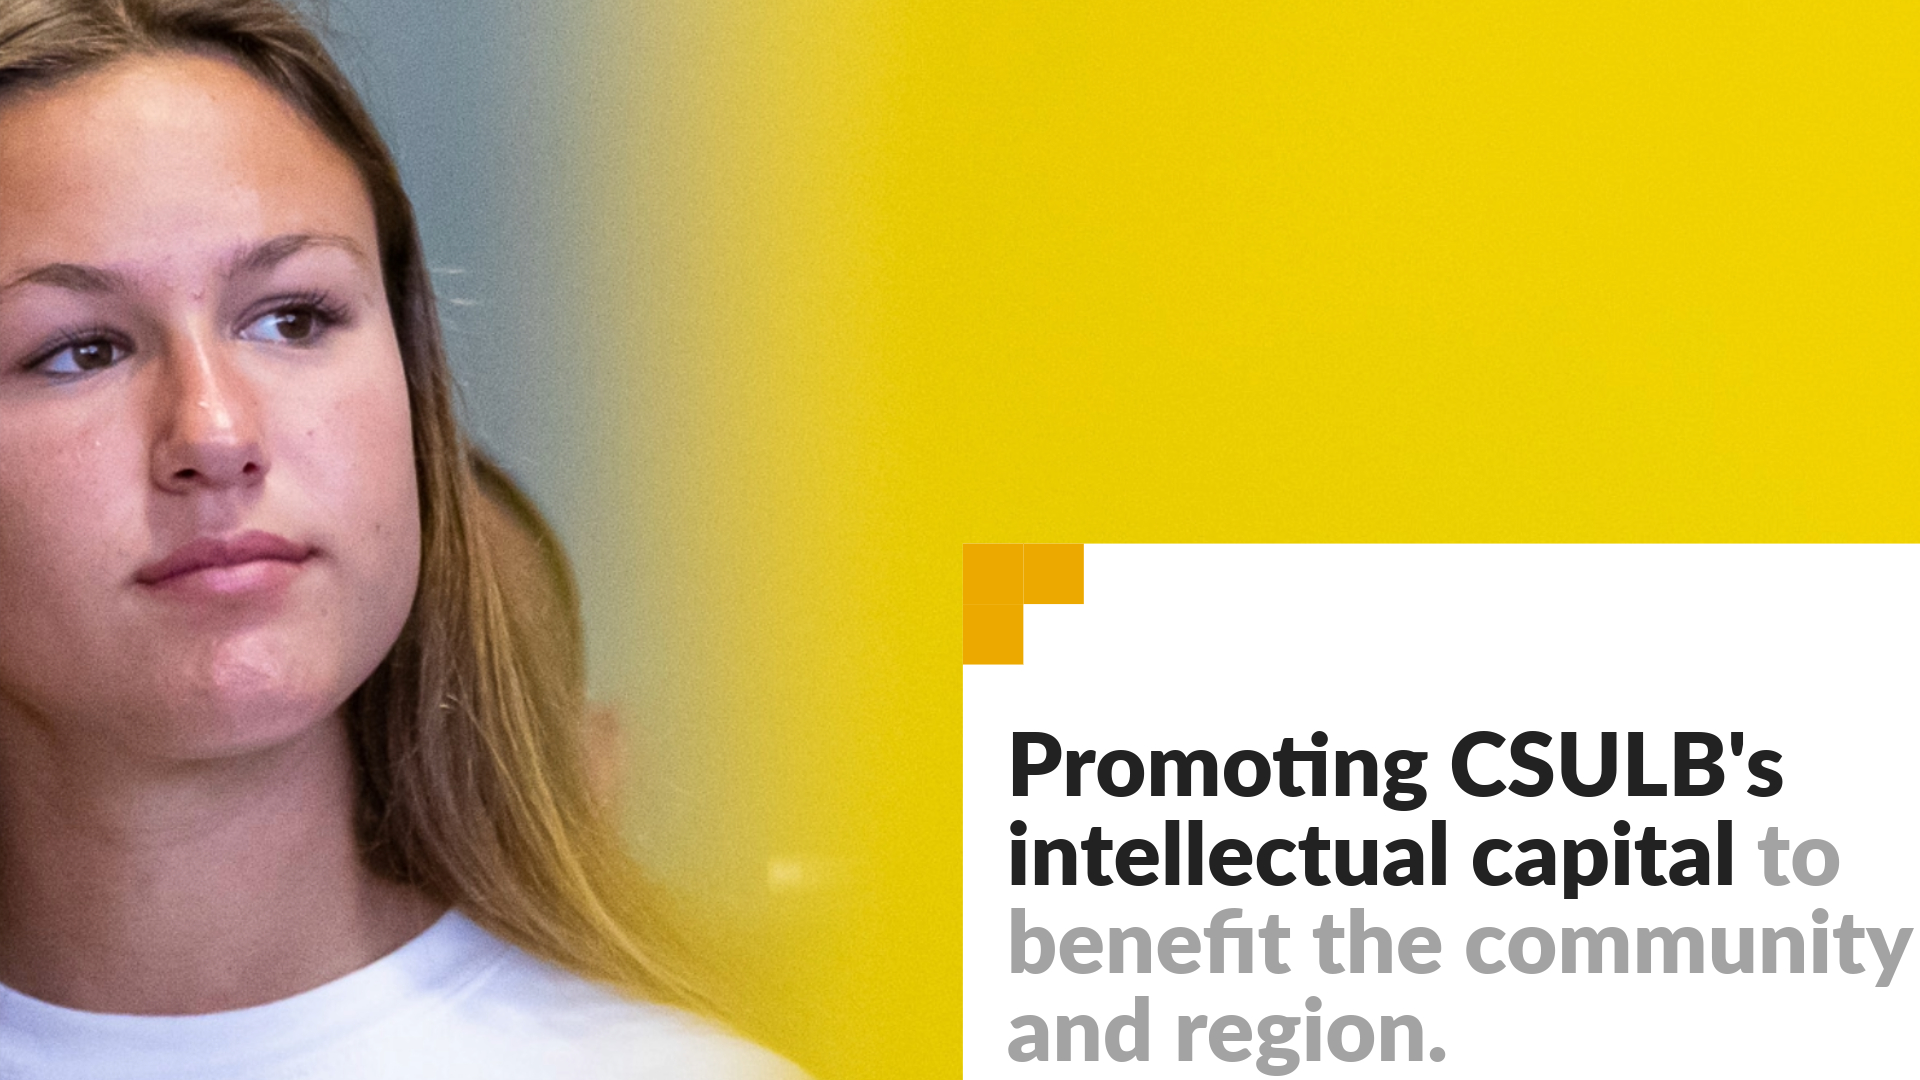 Promoting CSULB's intellectual capital to benefit the community and region. Image shows a student looking off camera. 